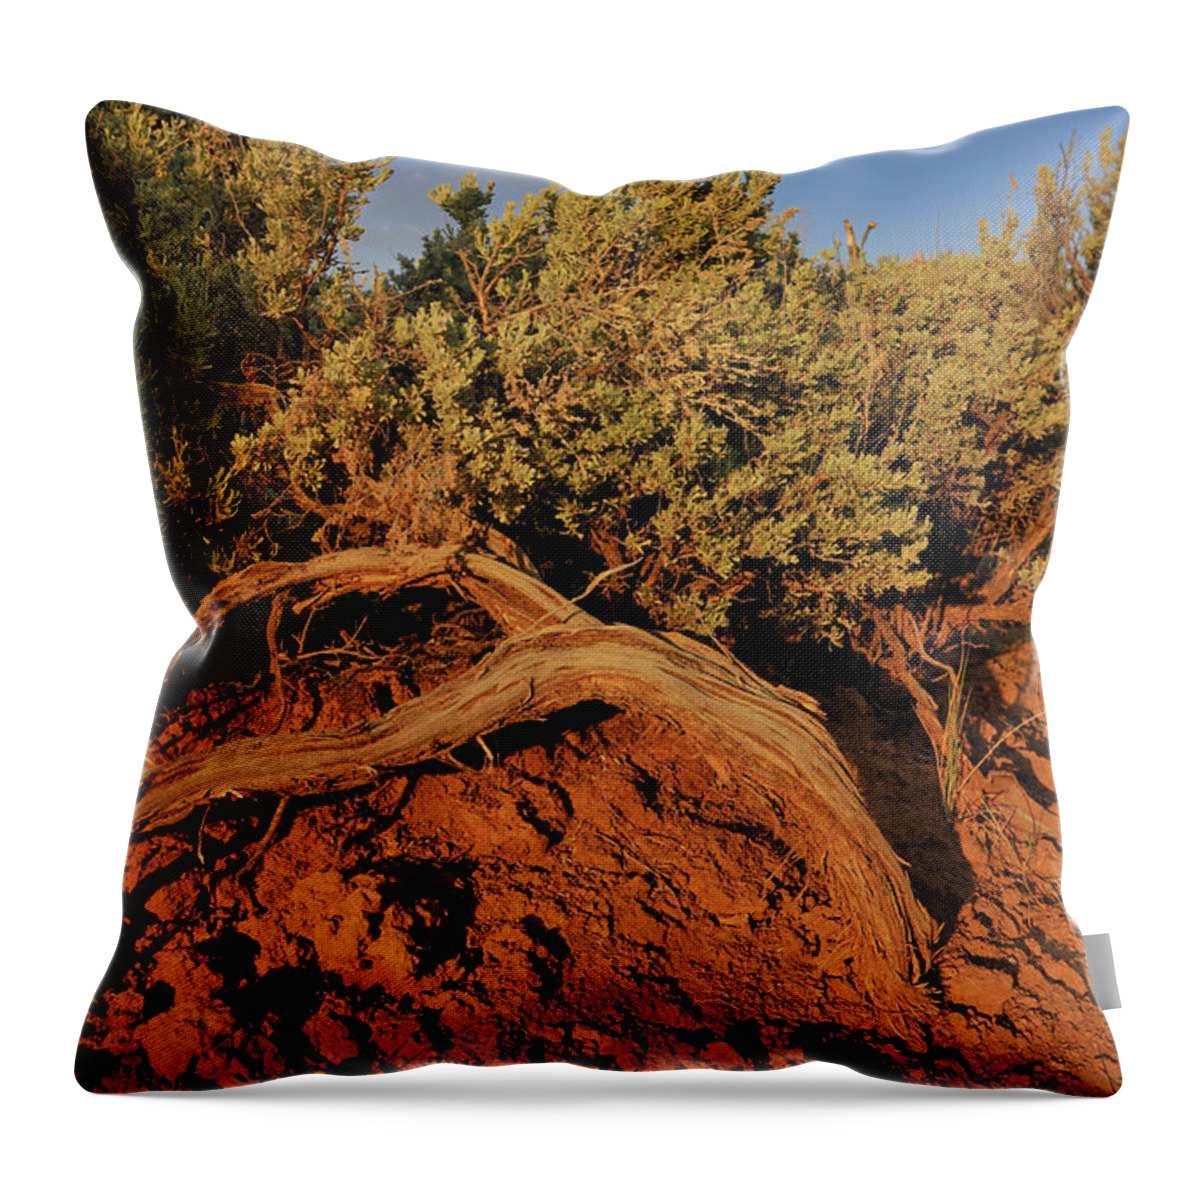 Landscape Throw Pillow featuring the photograph Sagebrush At Sunset by Ron Cline